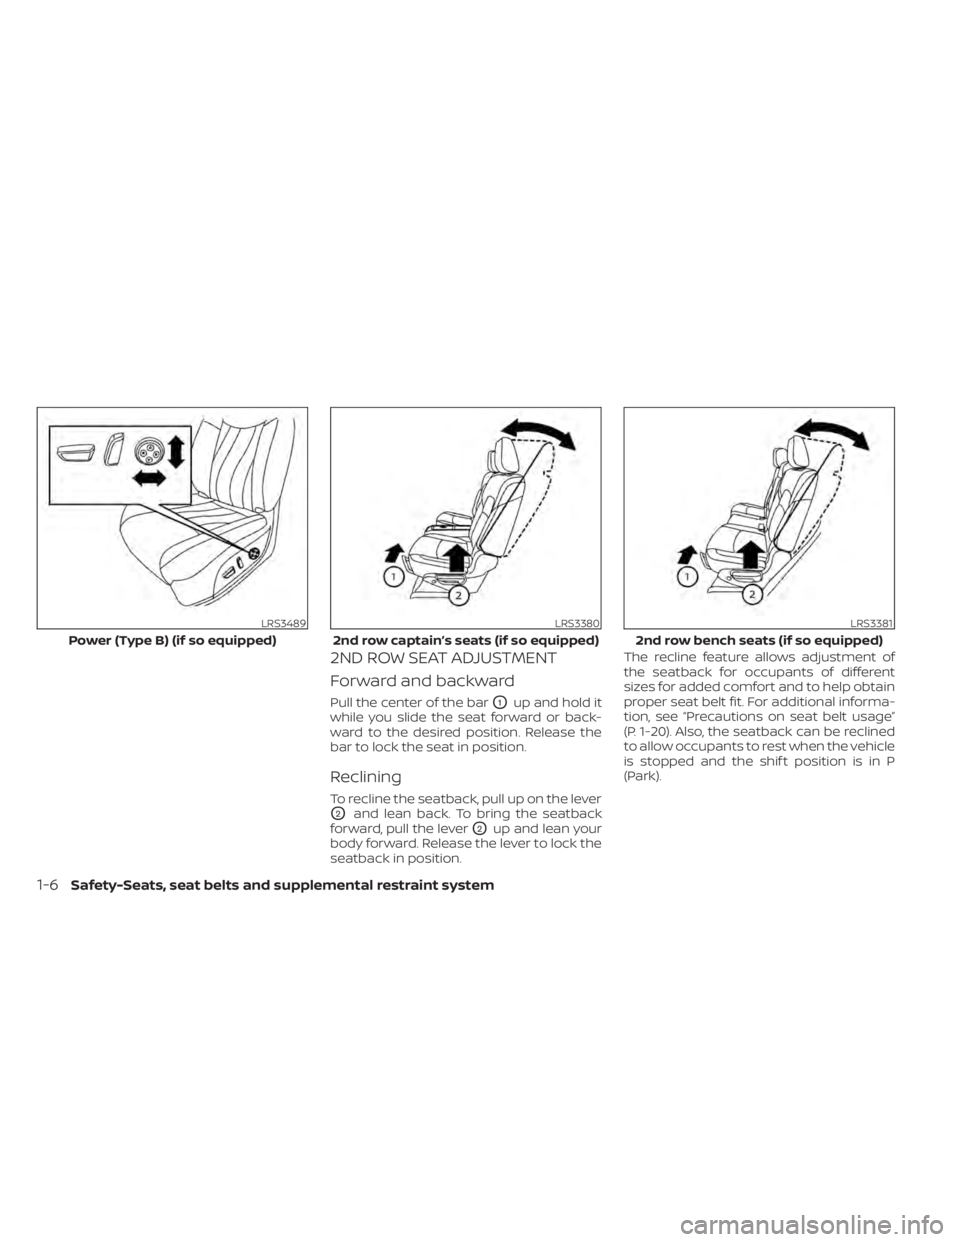 NISSAN PATHFINDER 2023 Owners Guide 2ND ROW SEAT ADJUSTMENT
Forward and backward
Pull the center of the barO1up and hold it
while you slide the seat forward or back-
ward to the desired position. Release the
bar to lock the seat in posi